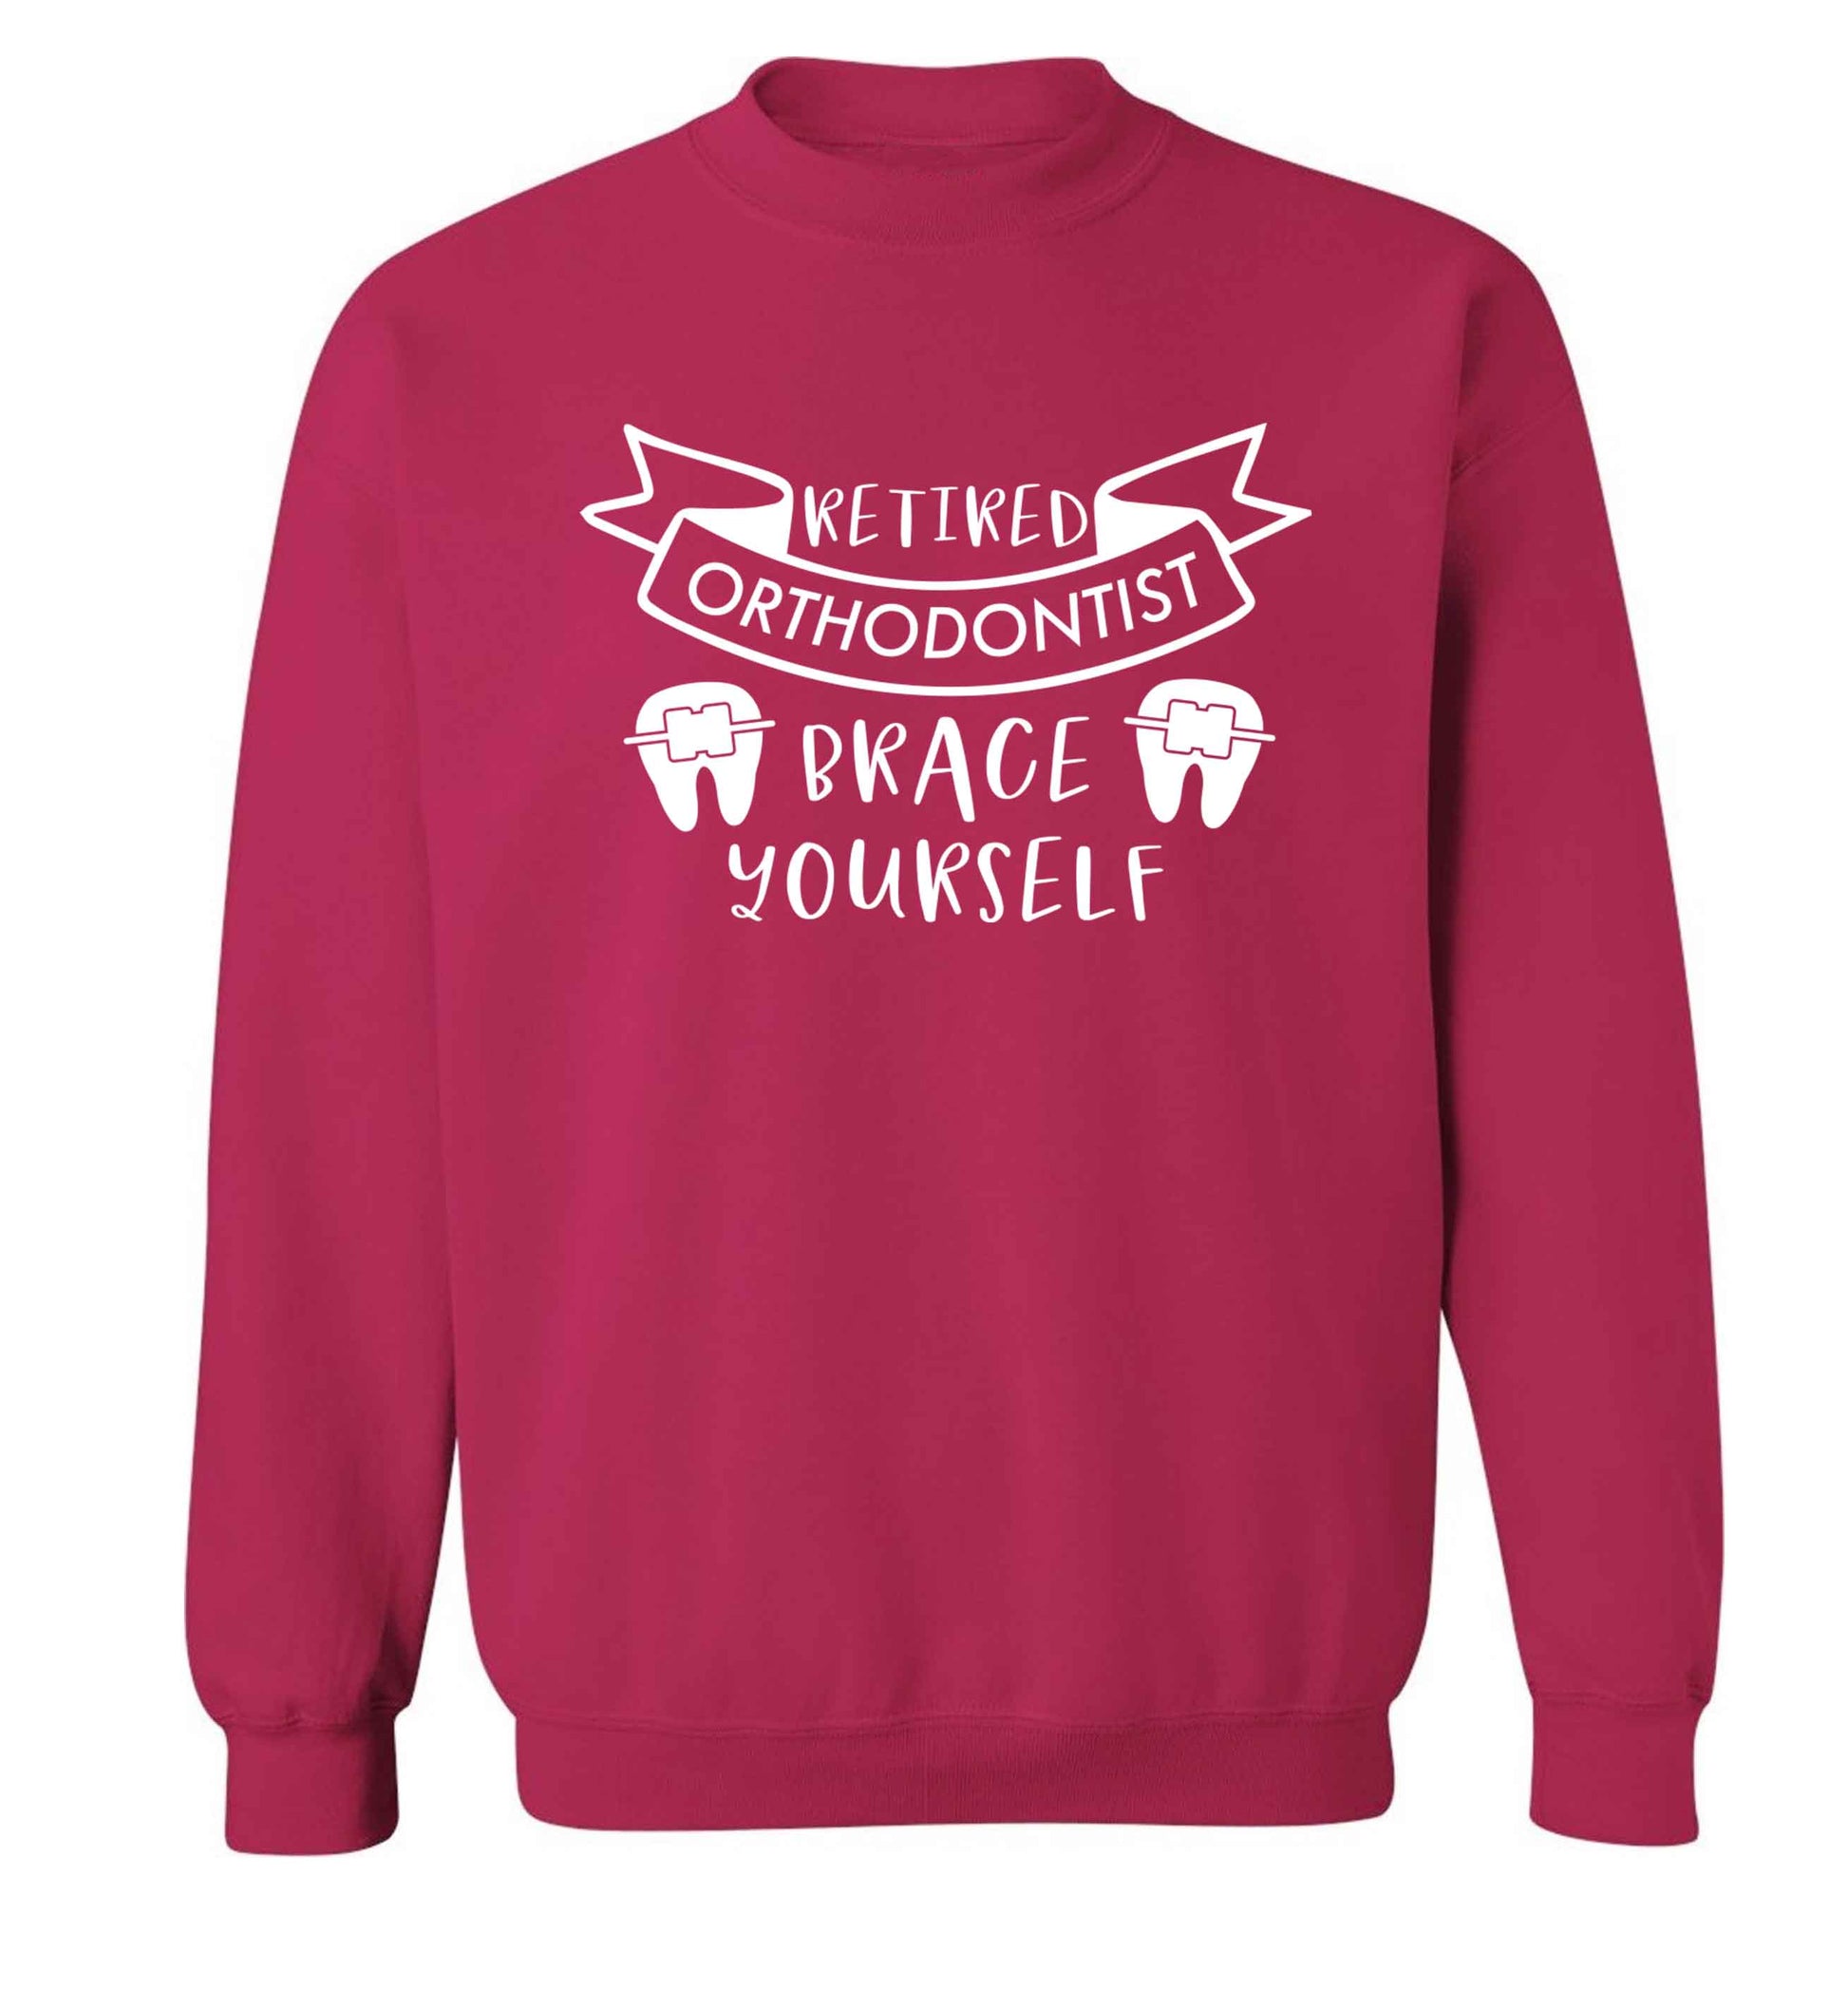 Retired orthodontist brace yourself Adult's unisex pink Sweater 2XL